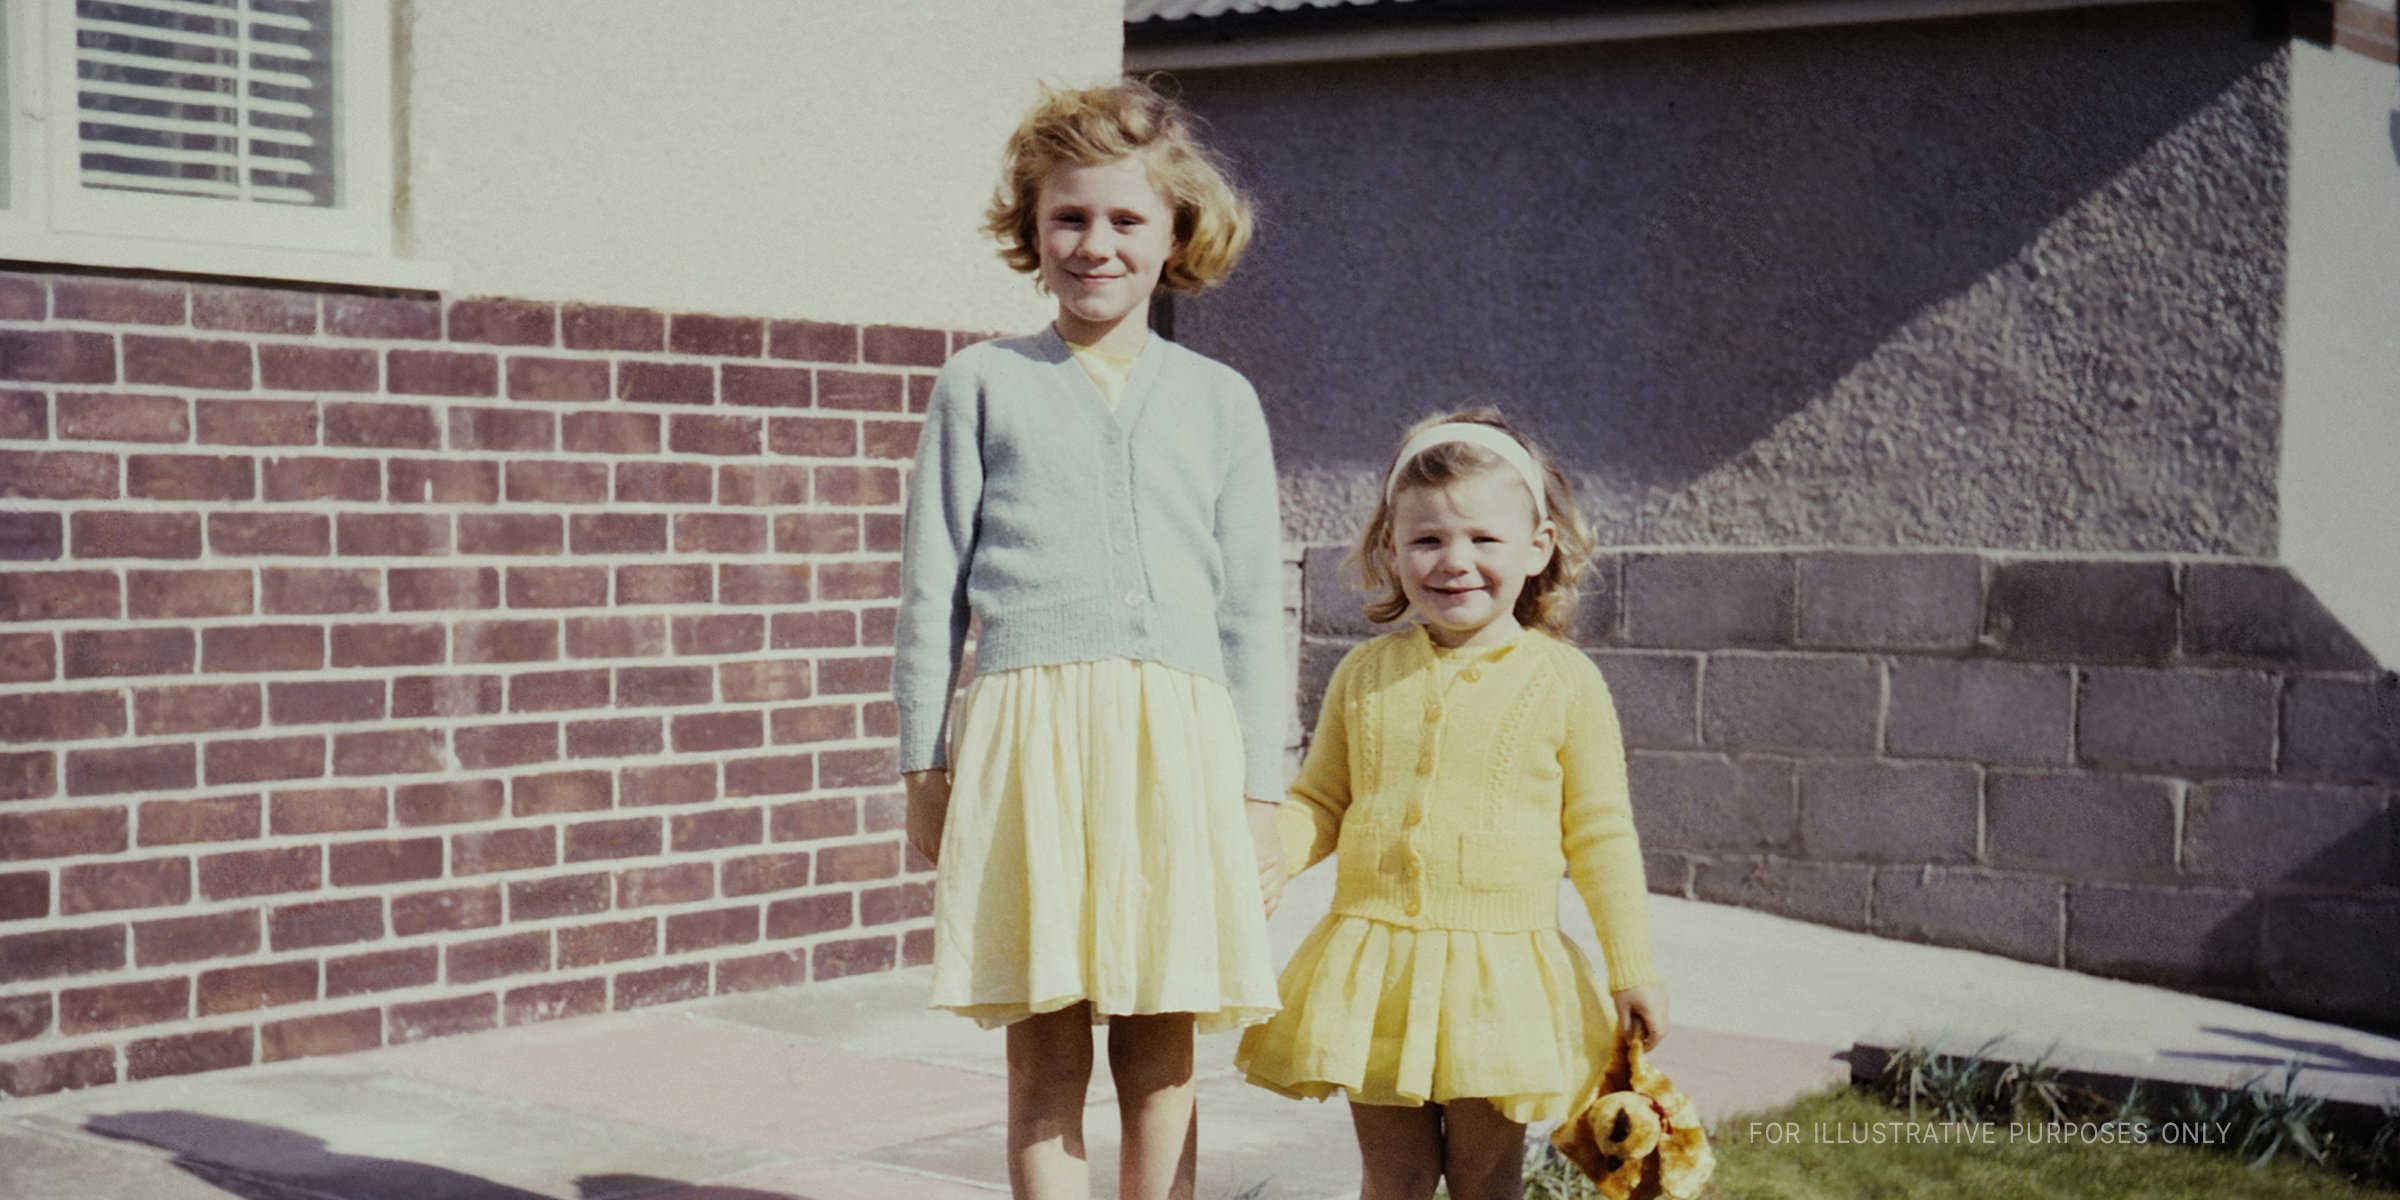 Two Girls Smiling While Posing For A Photo. | Source: Getty Images